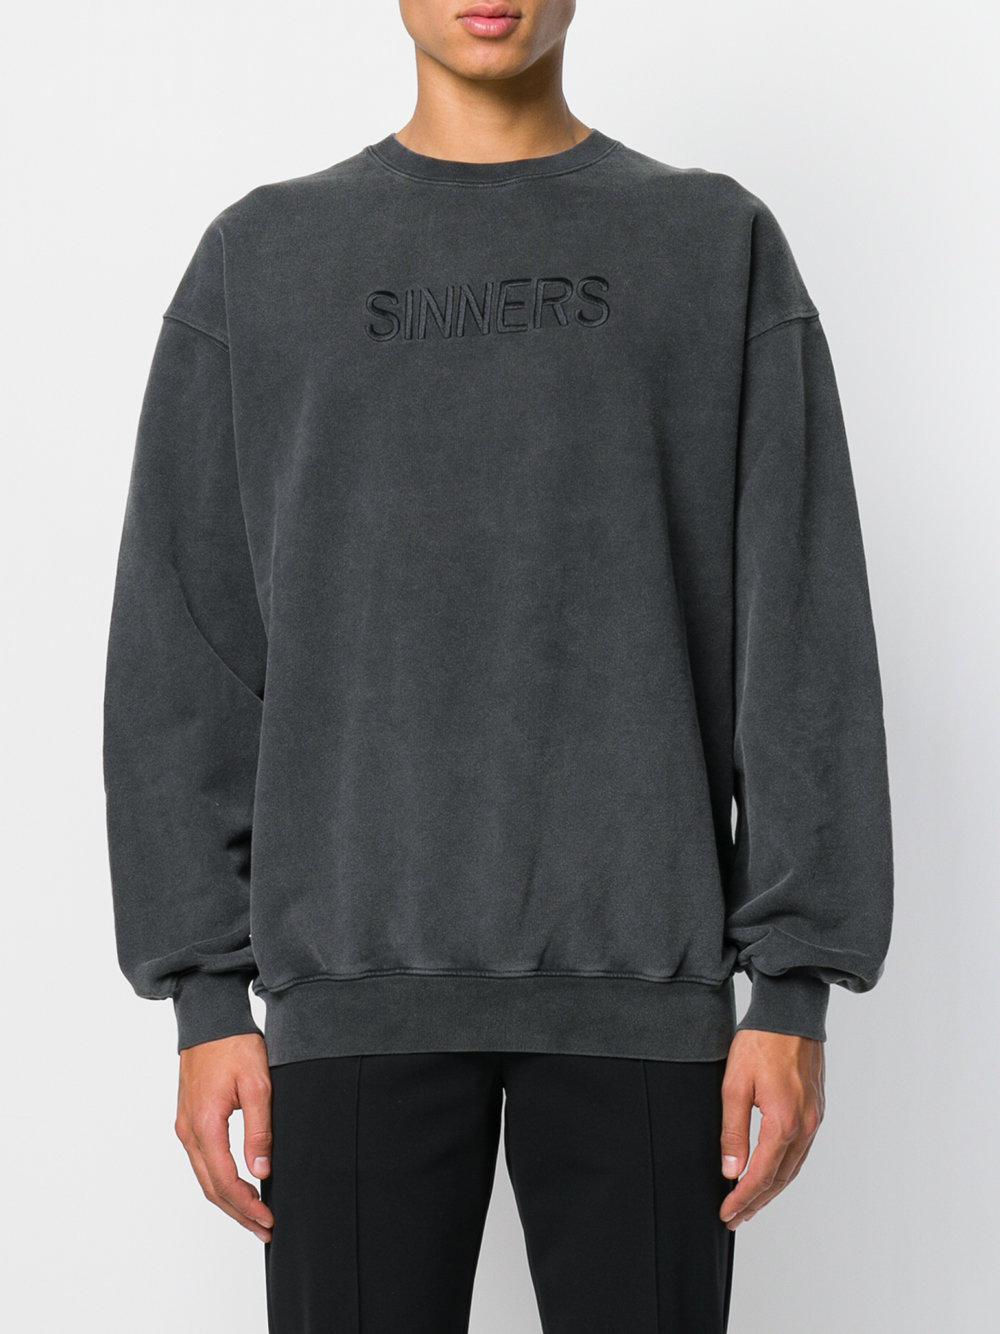 Balenciaga Cotton Sinners Oversized Sweater in Black for Men - Lyst